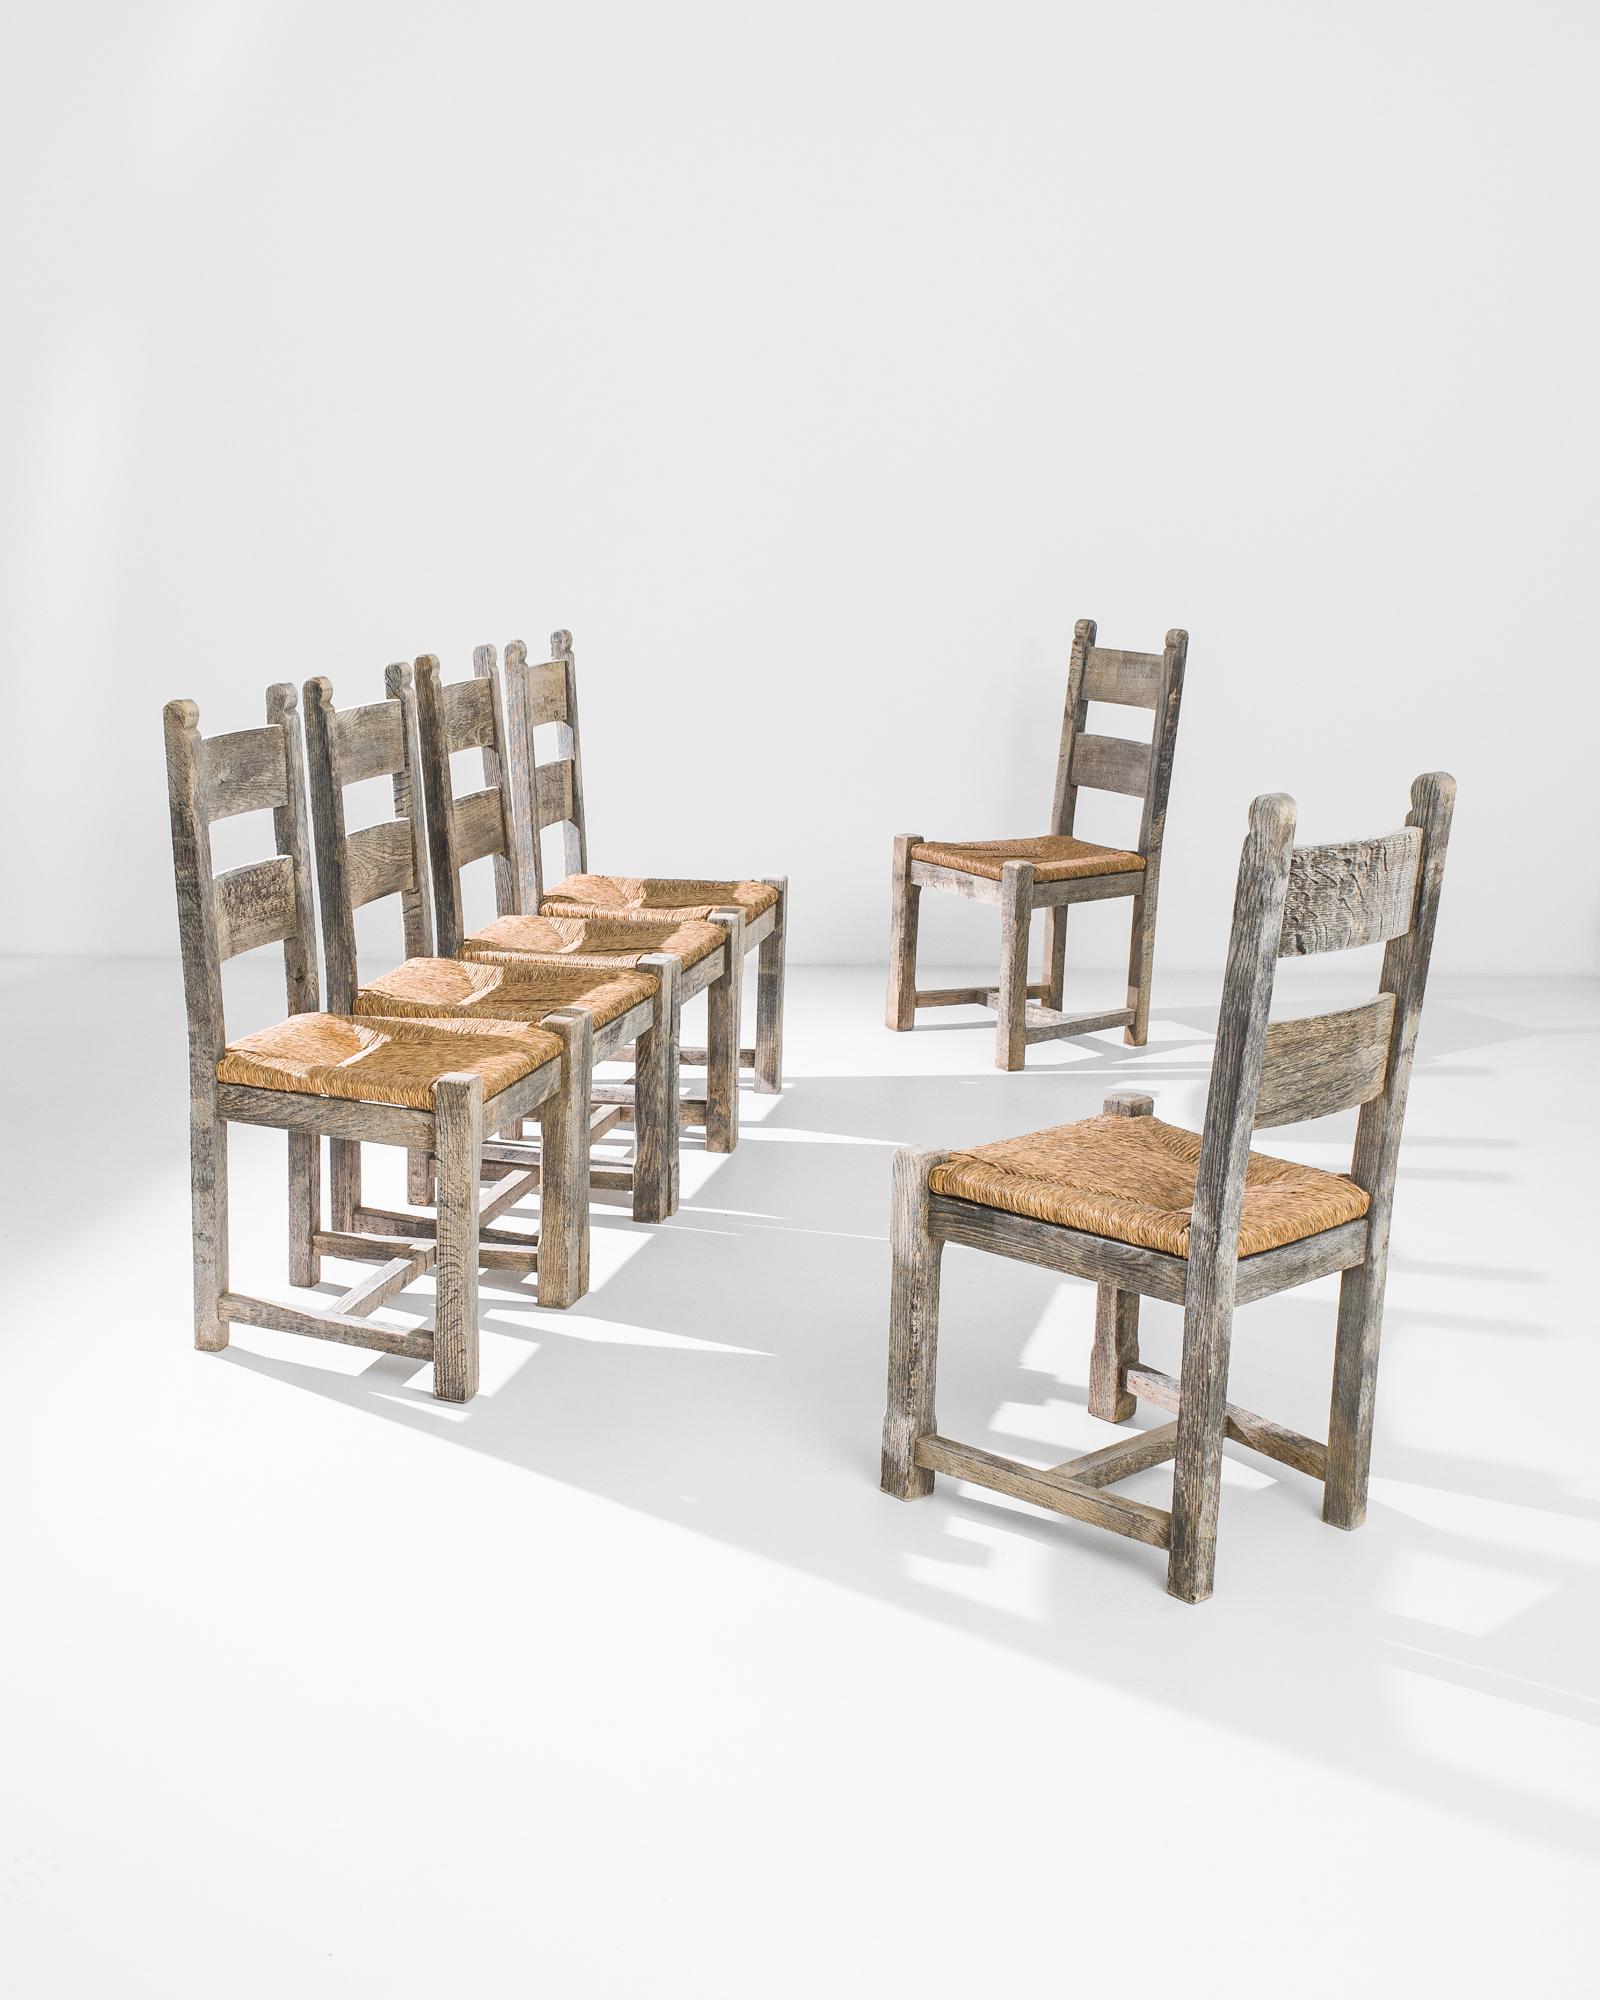 A set of six oak dining chairs from 1960s Belgium. The farmhouse shape is accentuated by the rustic finish of the wood, marked by a textural grain. A woven rattan seat brings out the amber undertones beneath the natural silver-grey color of the oak,